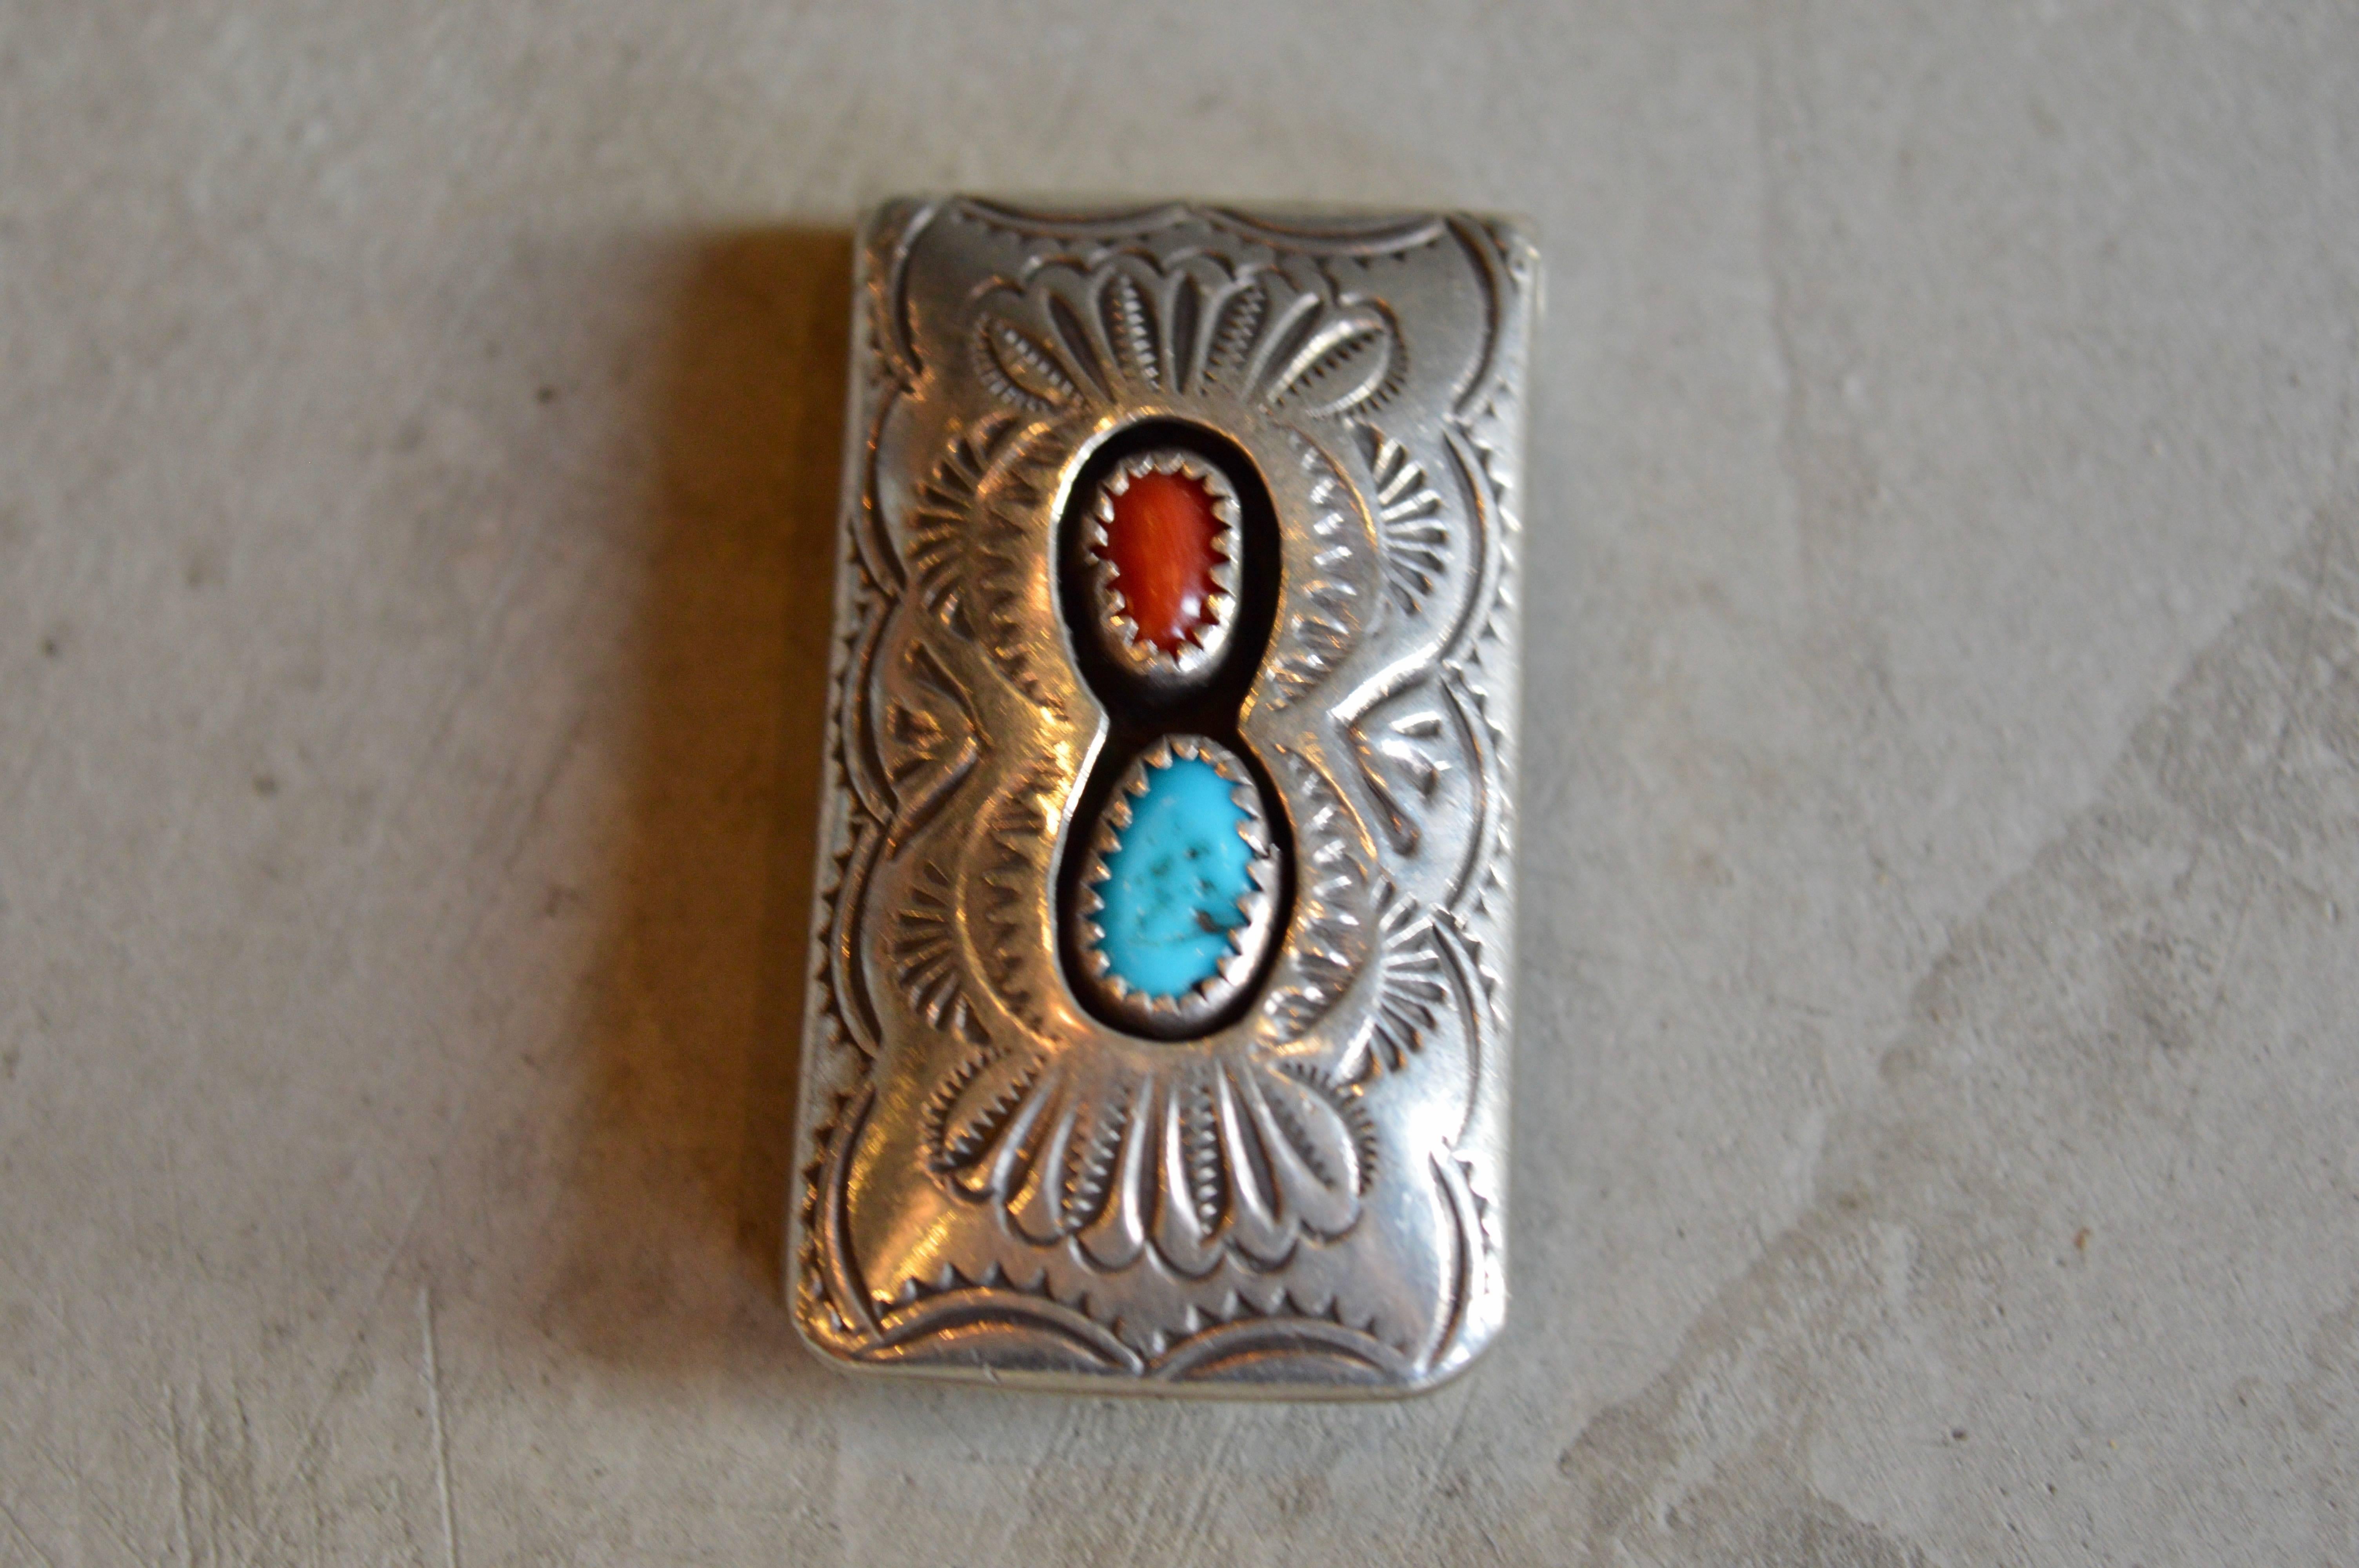 Handsome Native American money clip with inset stones and hand engravings. Excellent vintage condition.